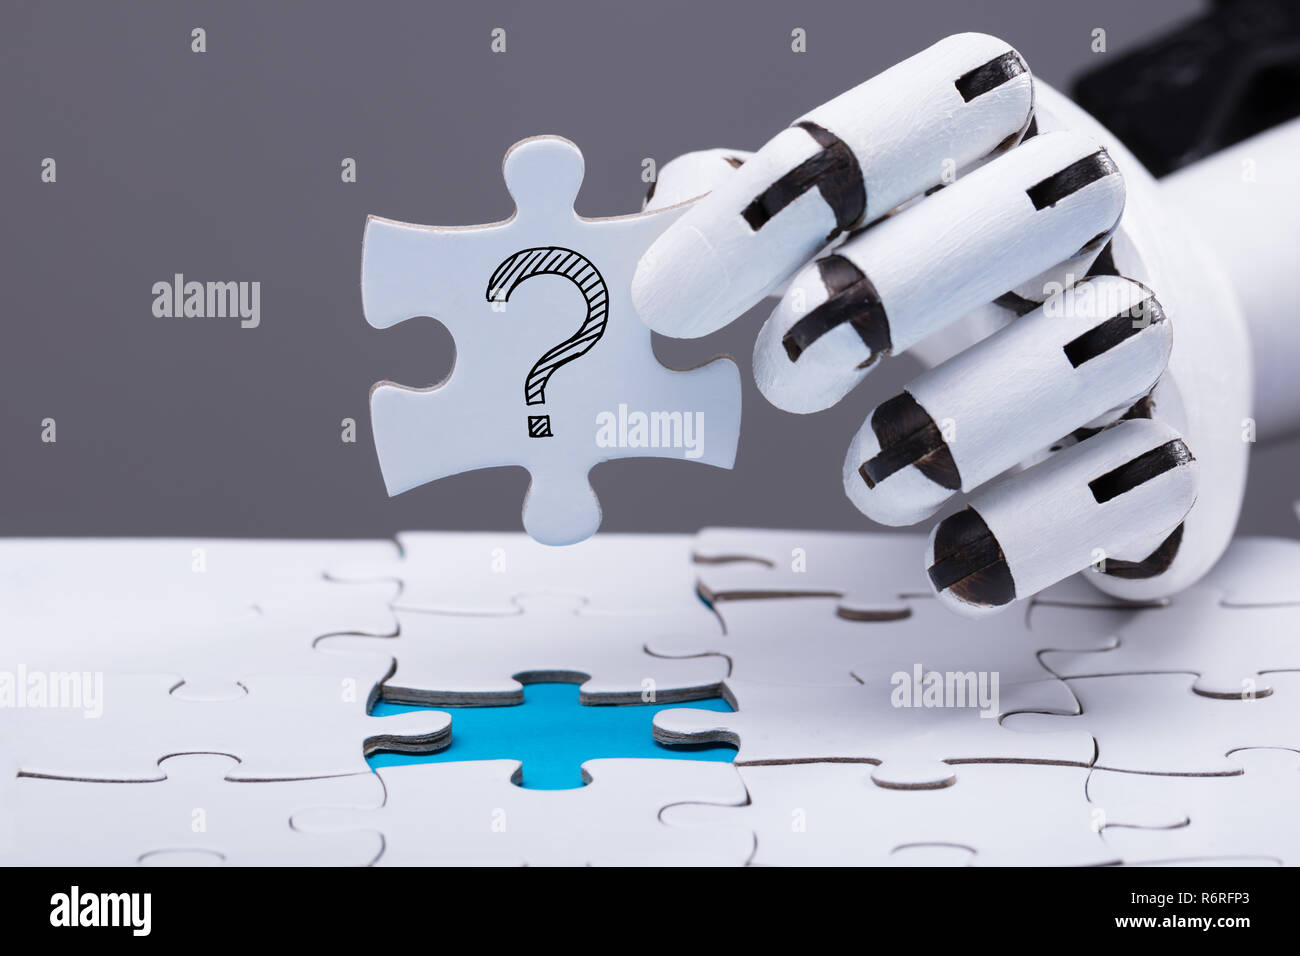 Robot Solving Jigsaw Puzzle Stock Photo